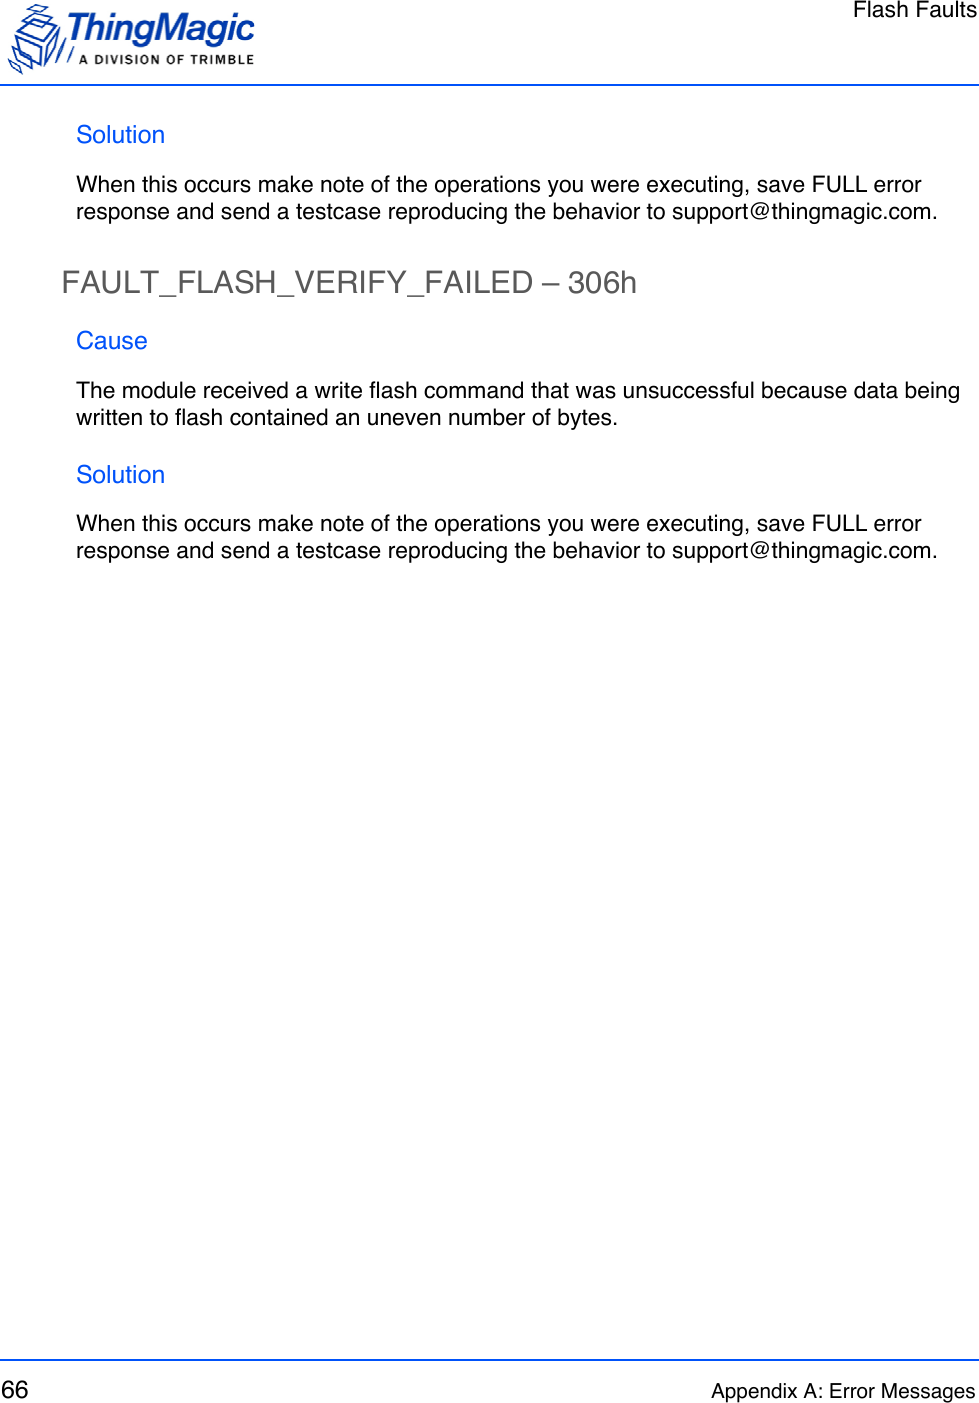 Flash Faults66 Appendix A: Error MessagesSolutionWhen this occurs make note of the operations you were executing, save FULL error response and send a testcase reproducing the behavior to support@thingmagic.com.FAULT_FLASH_VERIFY_FAILED – 306hCauseThe module received a write flash command that was unsuccessful because data being written to flash contained an uneven number of bytes.SolutionWhen this occurs make note of the operations you were executing, save FULL error response and send a testcase reproducing the behavior to support@thingmagic.com.